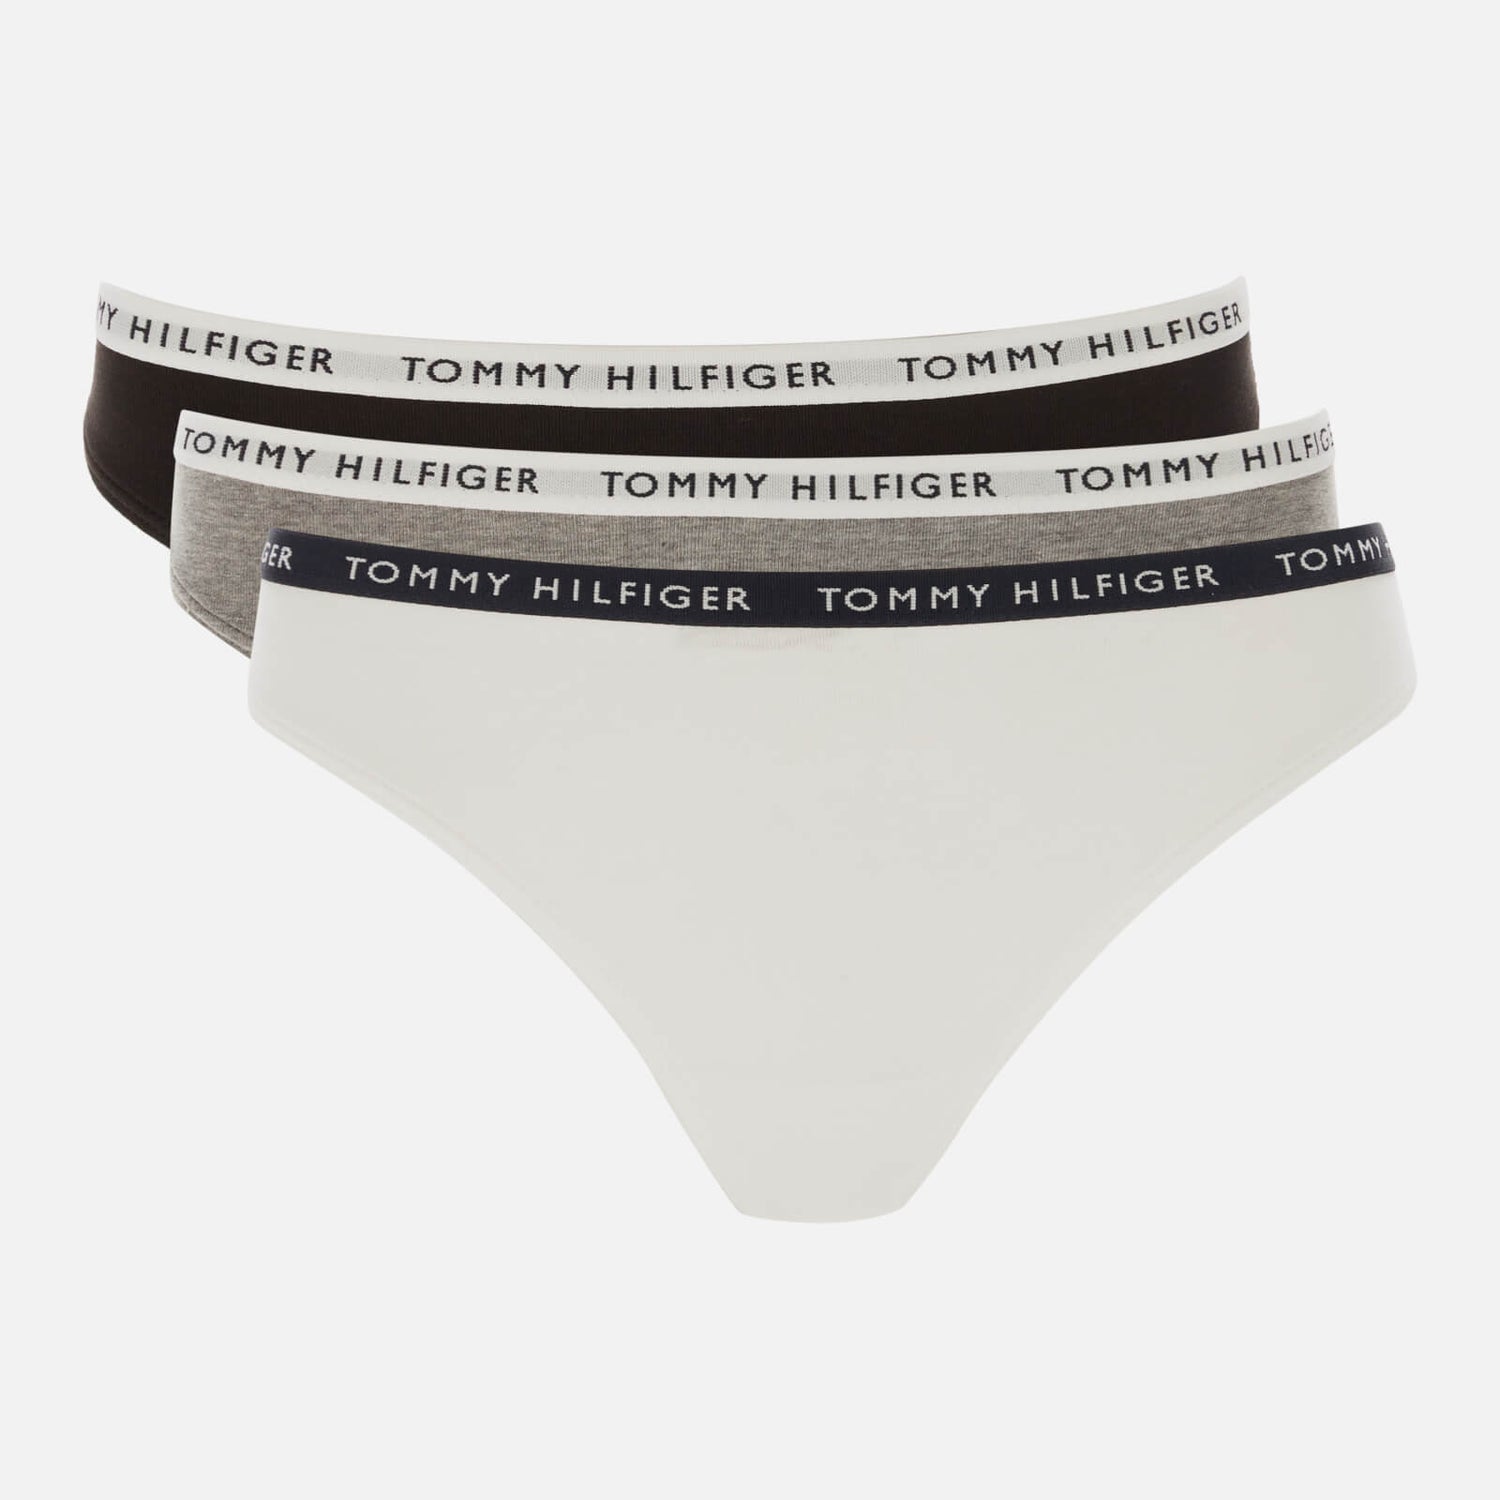 Tommy Hilfiger Women's Recycled 3P Thong - Grey/White/Black - M